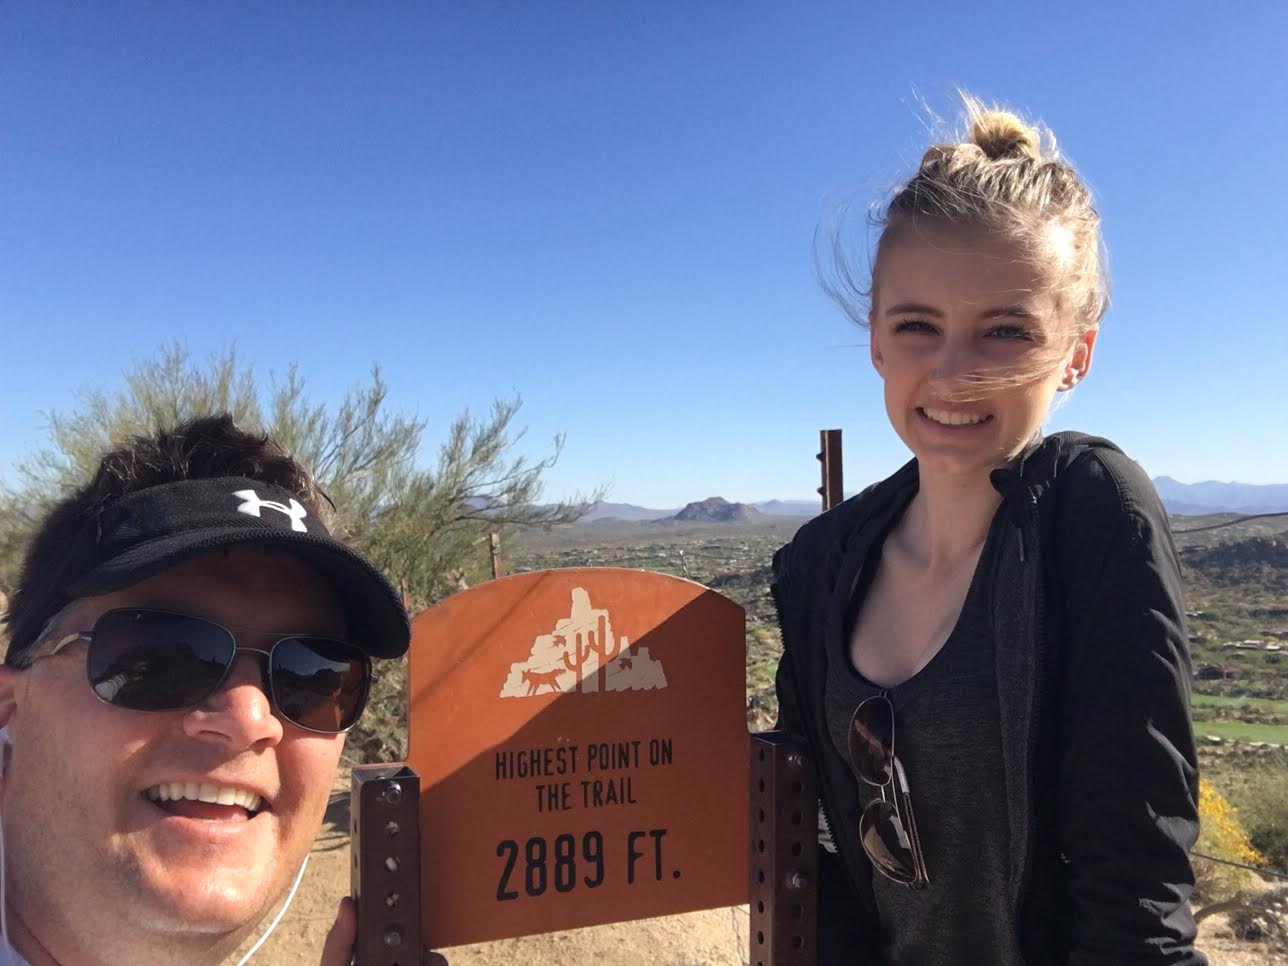 Mayor of Pinnacle Peak Jeff Sibbach with daughter at highest point